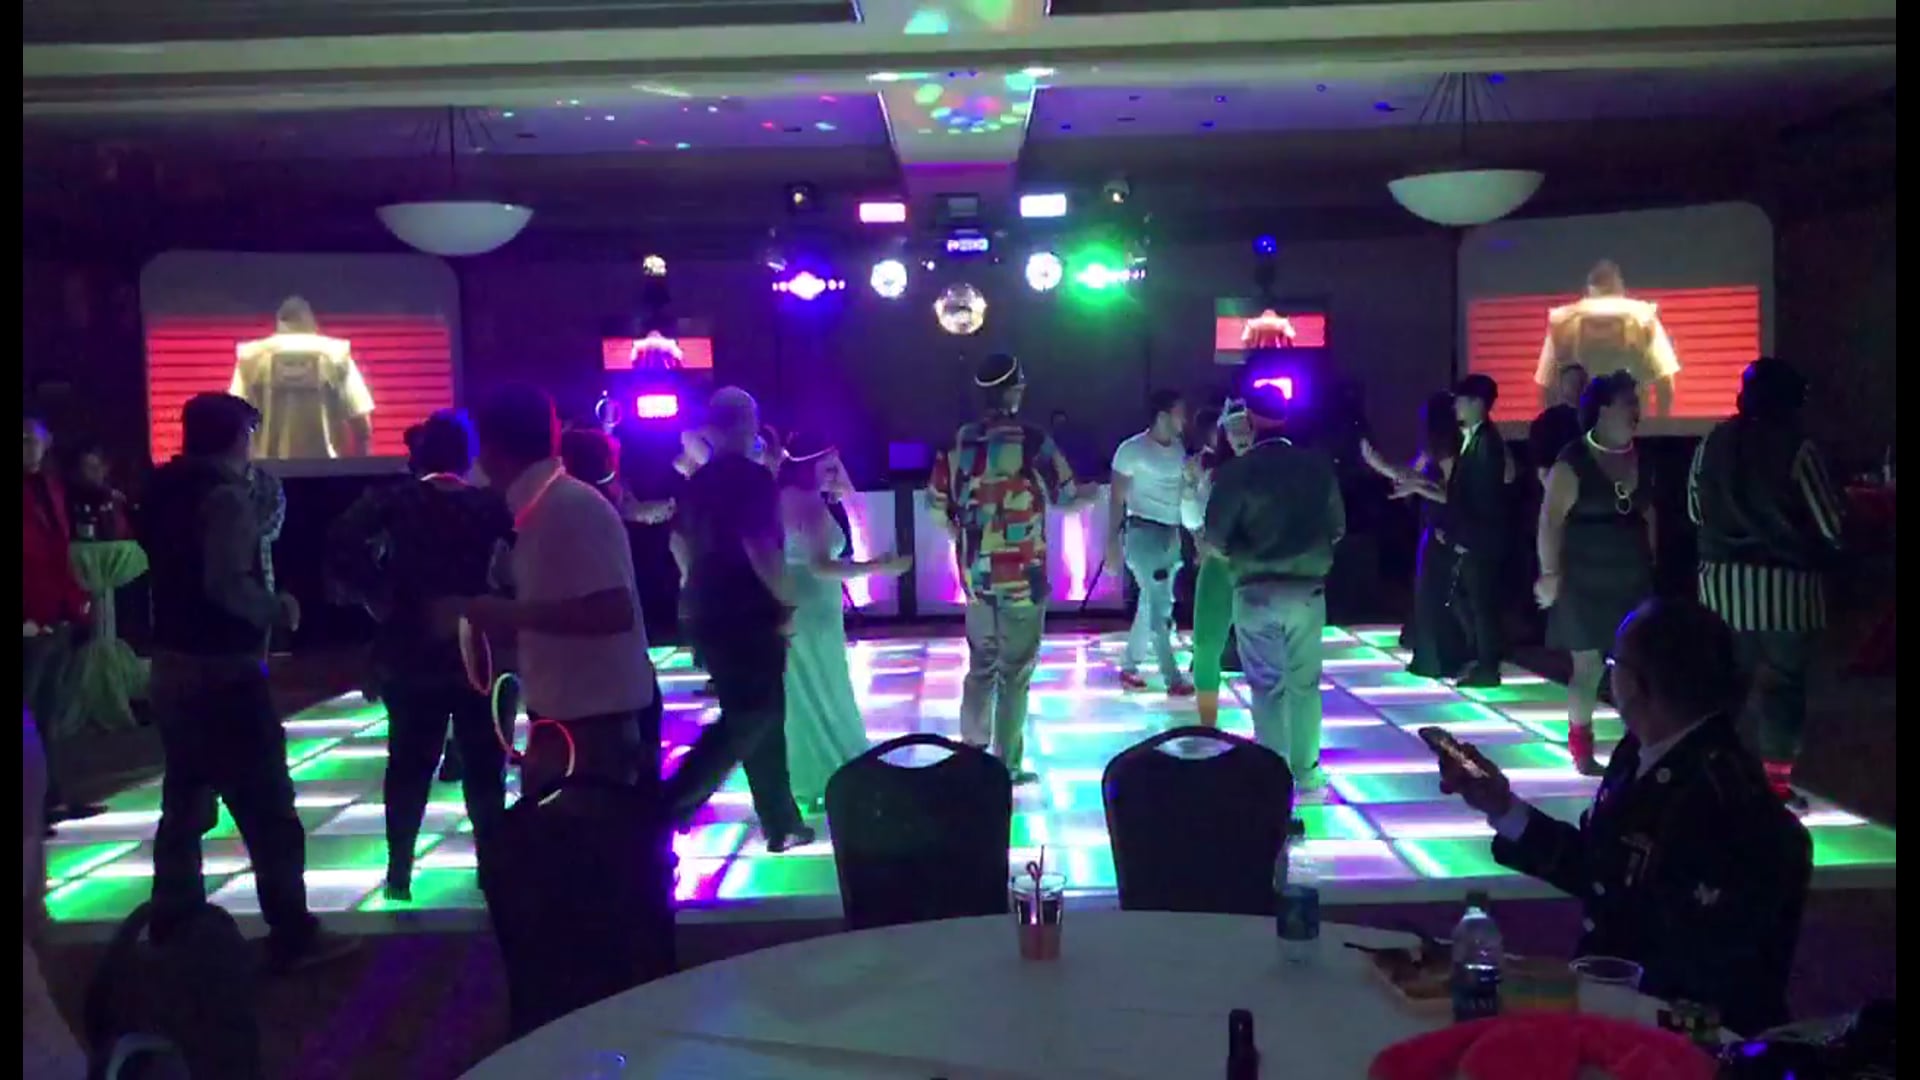 Promotional video thumbnail 1 for New England Lighted Dance Floor Rentals